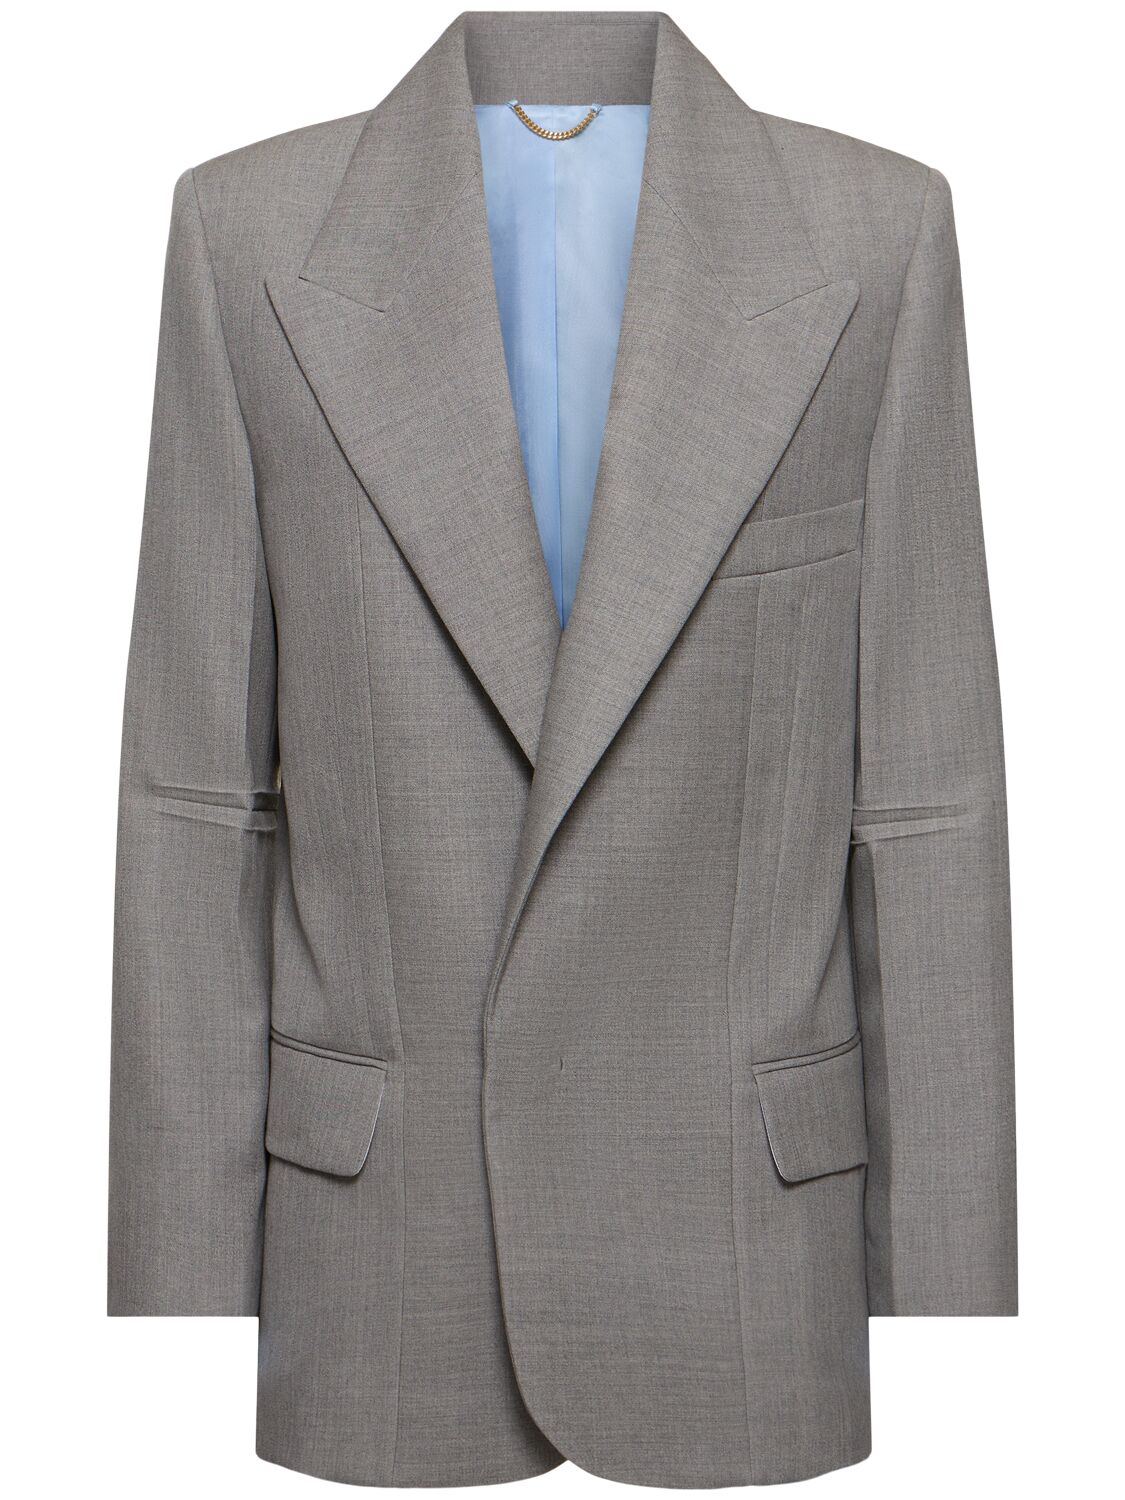 Victoria Beckham Darted Sleeve Tailored Wool Jacket In Grey